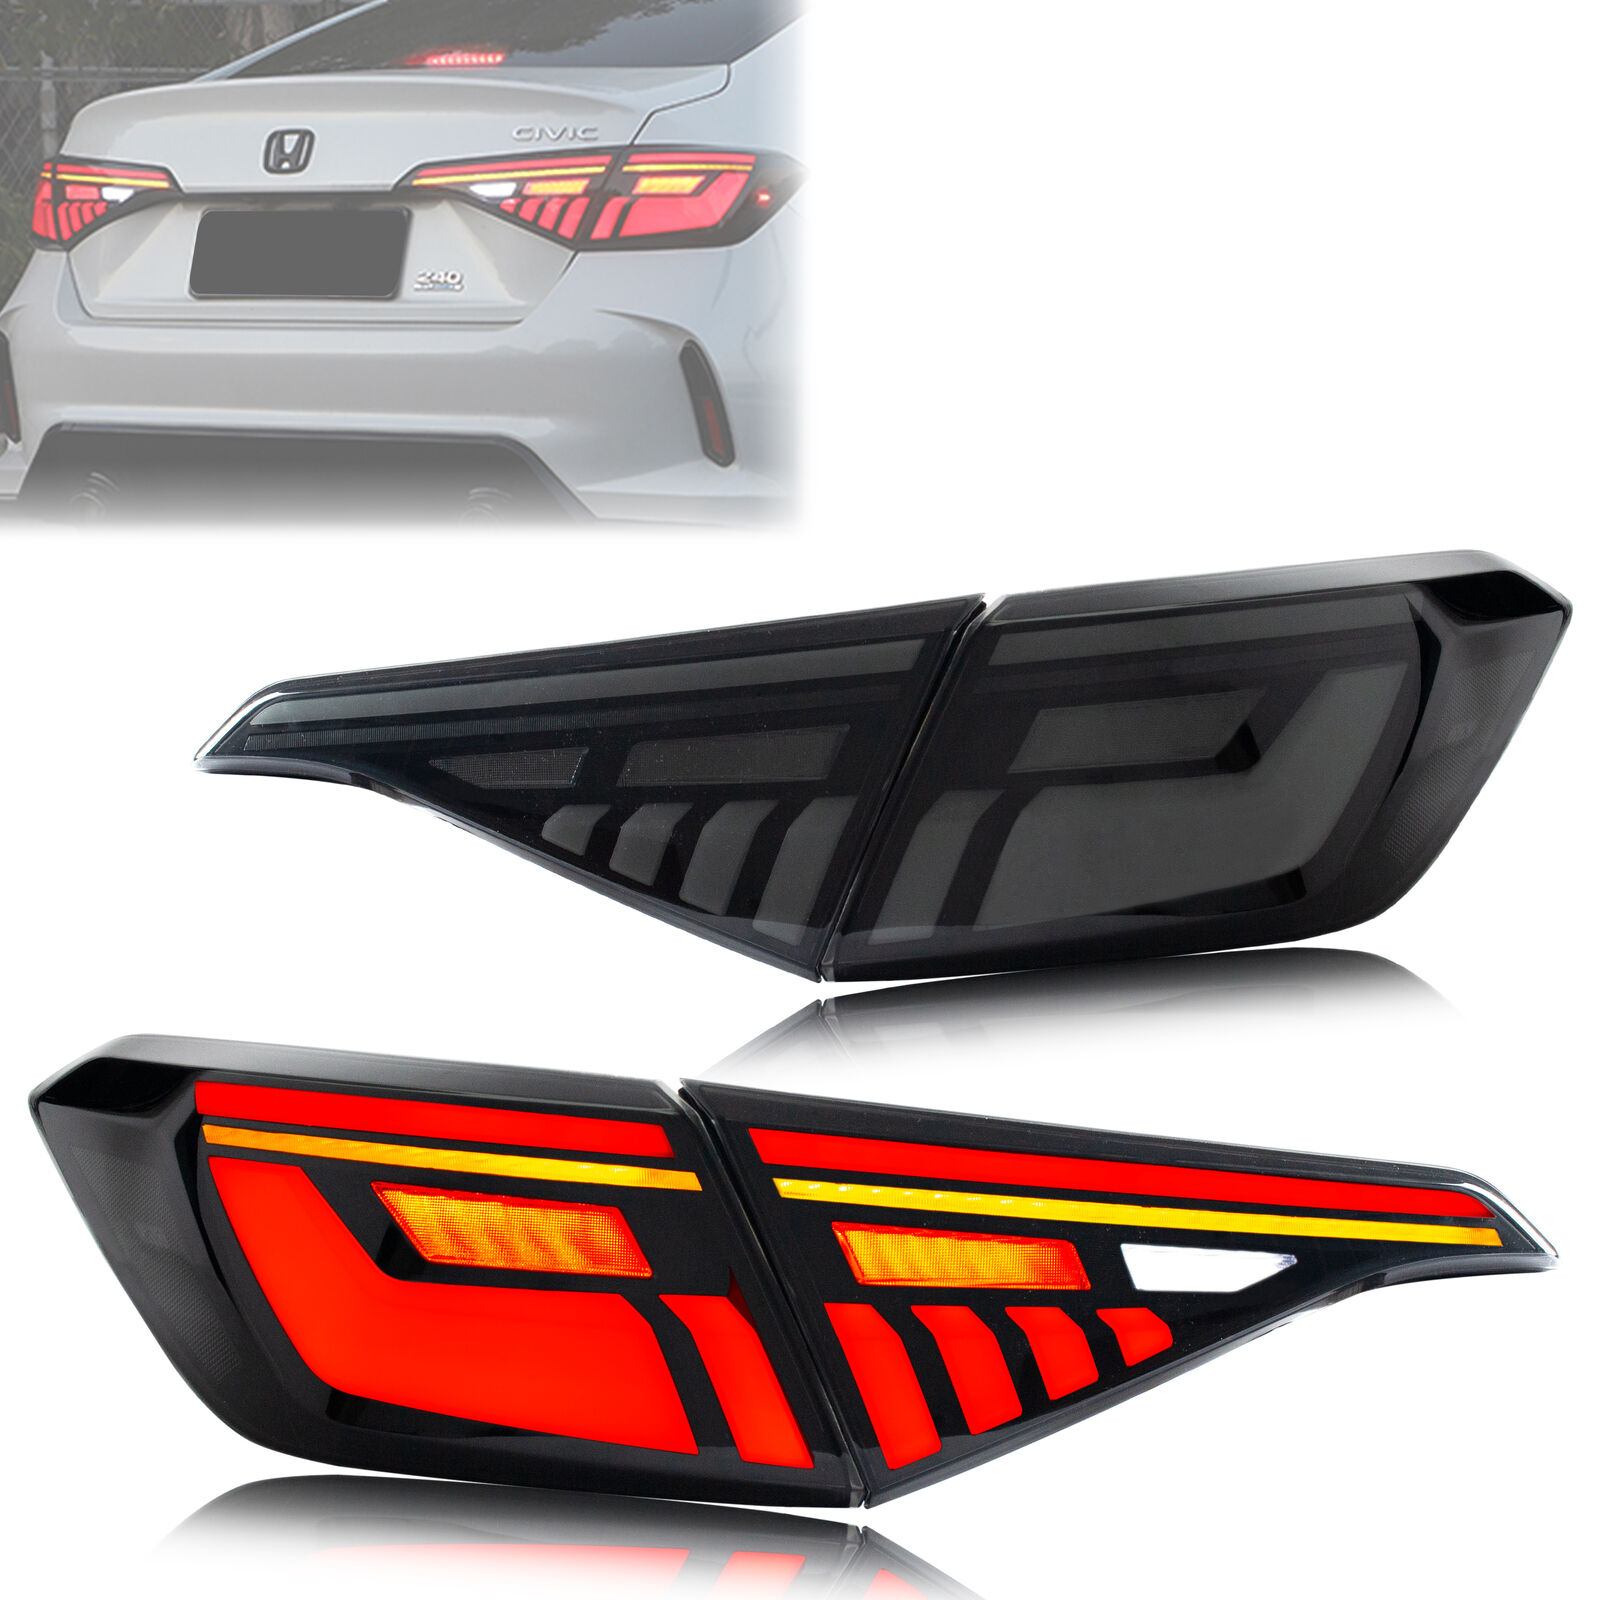 LED Sequential Tail Lights for Honda Civic 11th Gen 2022-2024 Sedan Rear Lamps